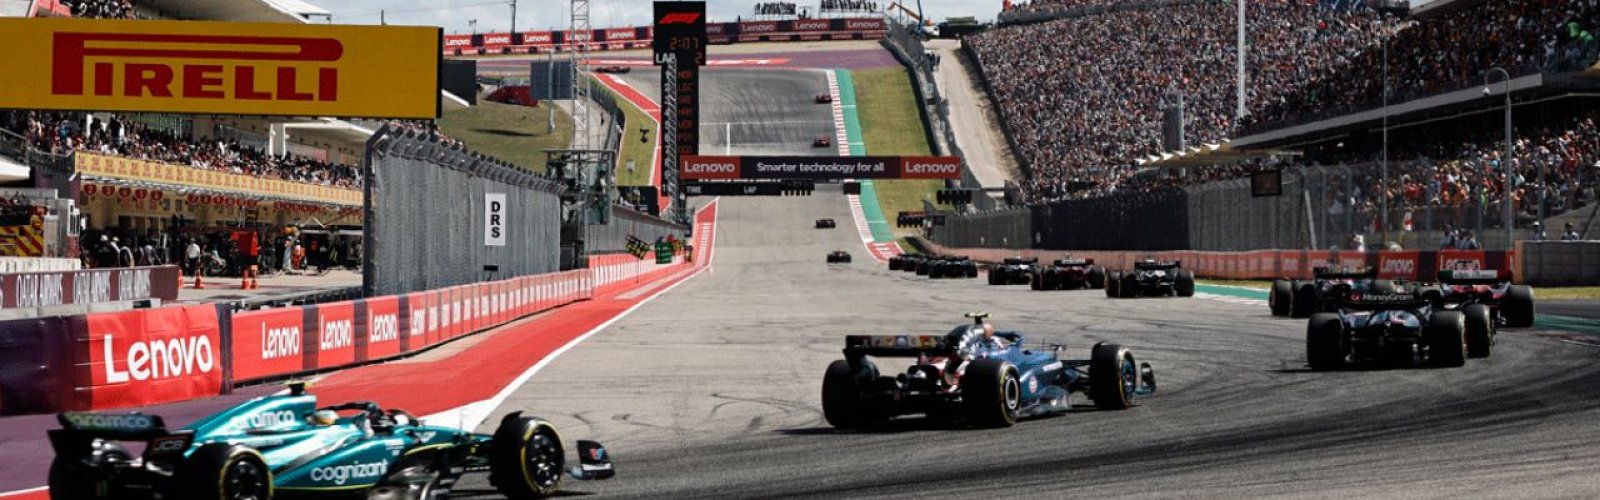 United States Formula 1 Grand Prix ticket packages image